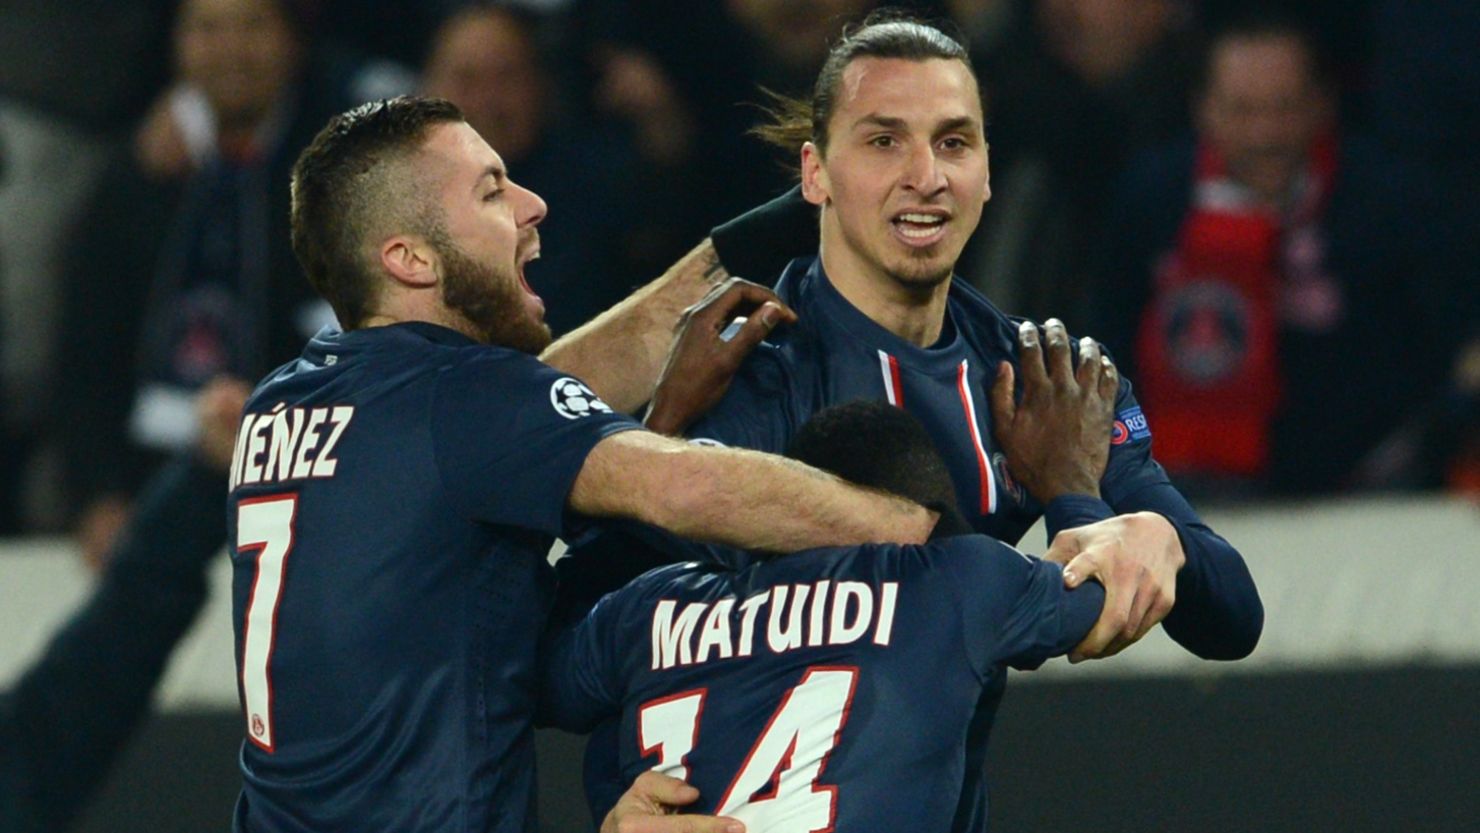 French club Paris Saint-Germain may have to pay hefty taxes on the salaries of star players such as Zlatan Ibrahimovic (center).